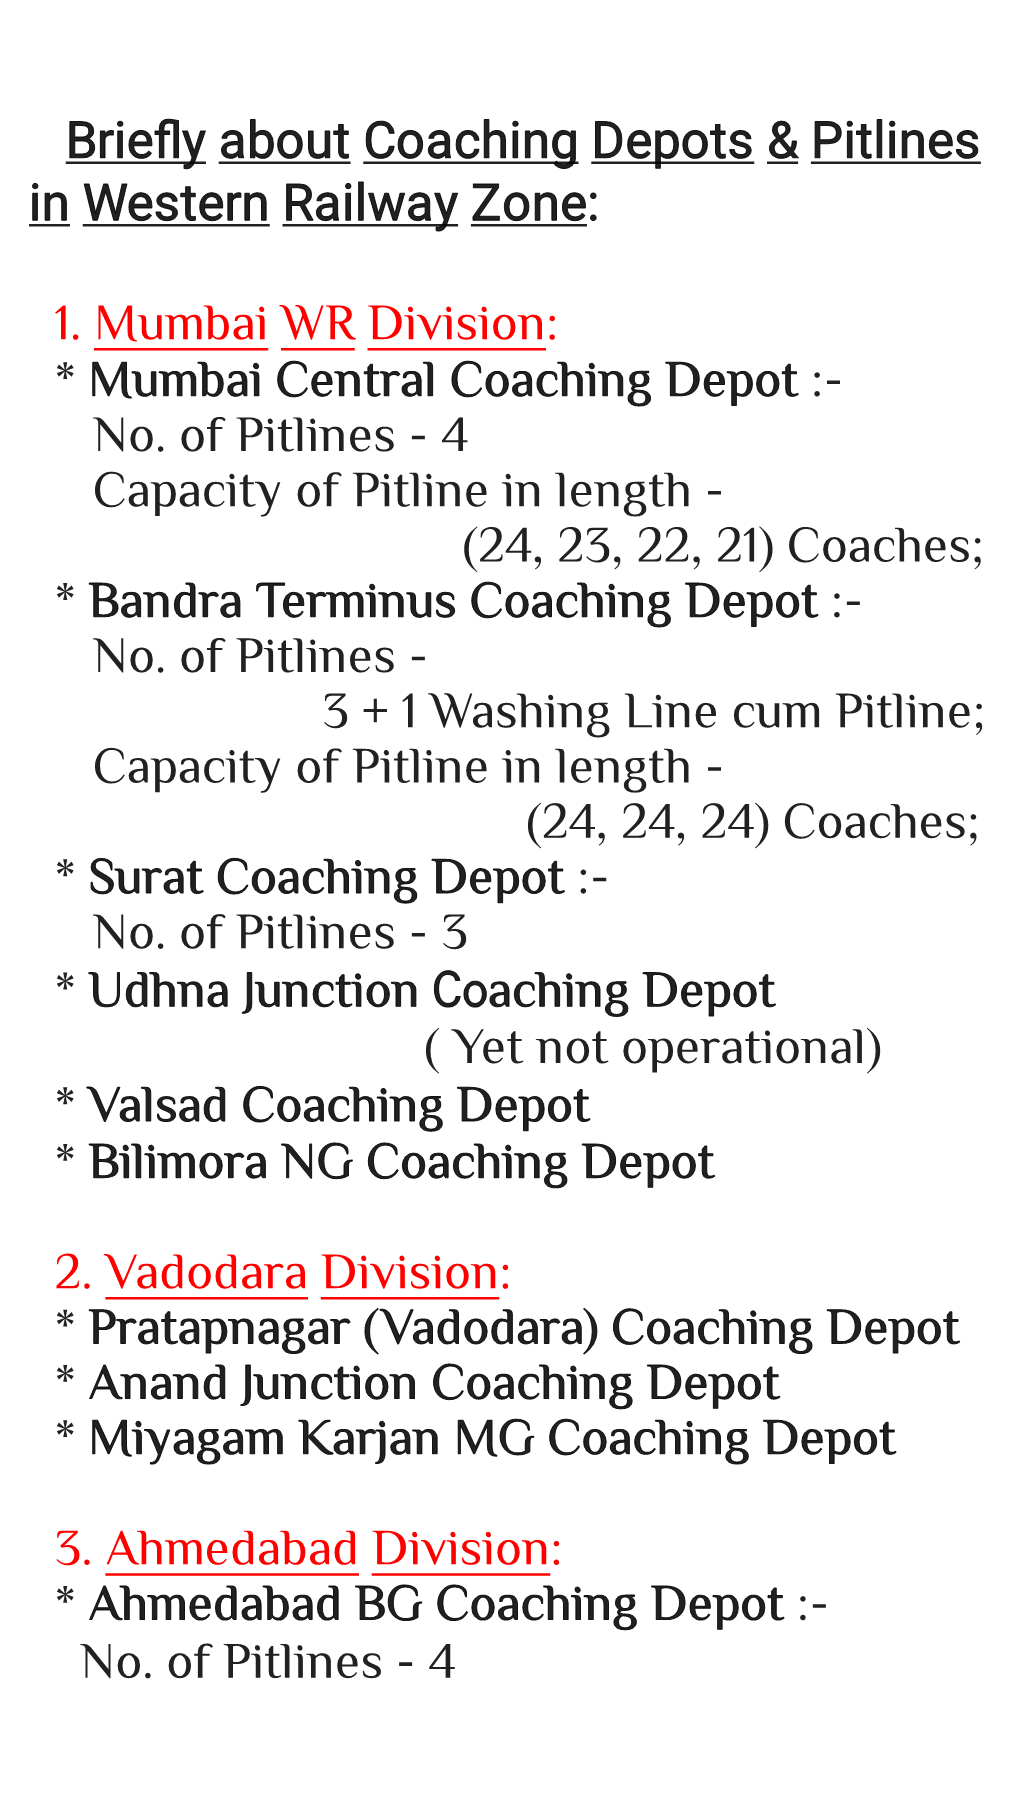 Briefly About Coaching Depots & Pitlines in Western Railway Zone